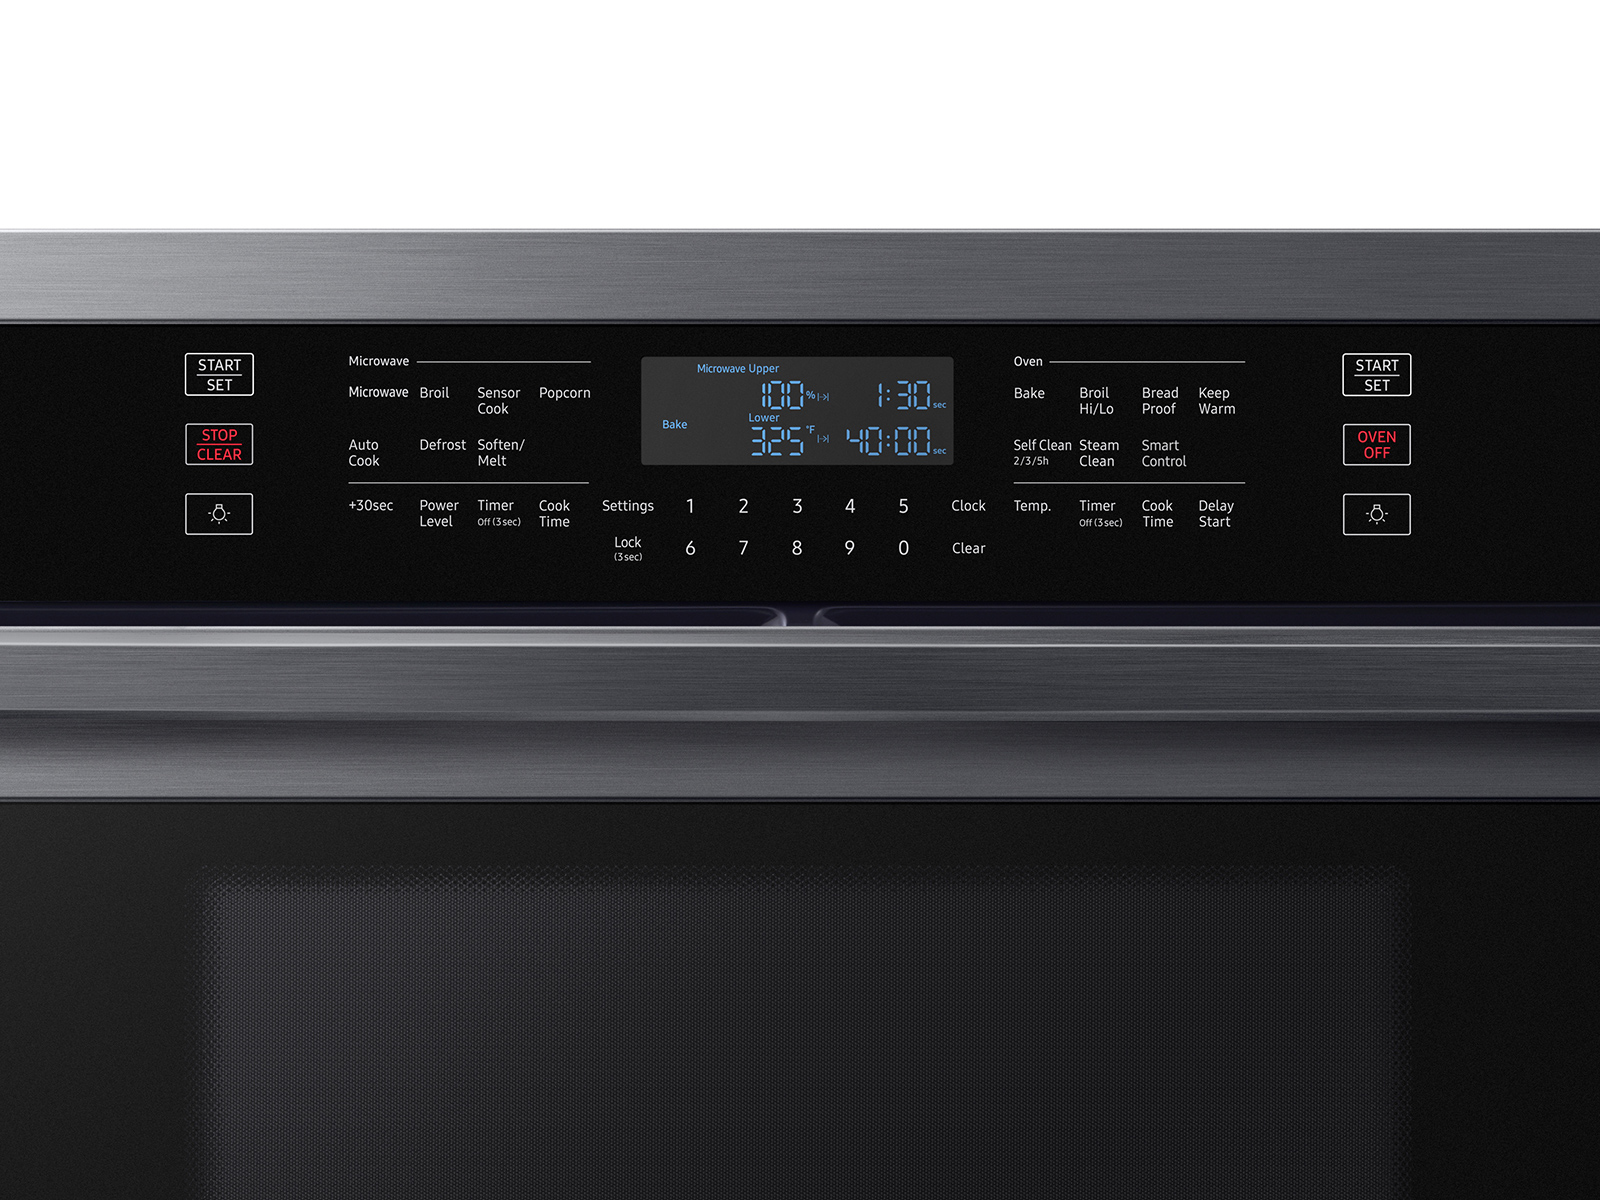 Samsung 30 Microwave Combination Wall Oven in Black Stainless Steel